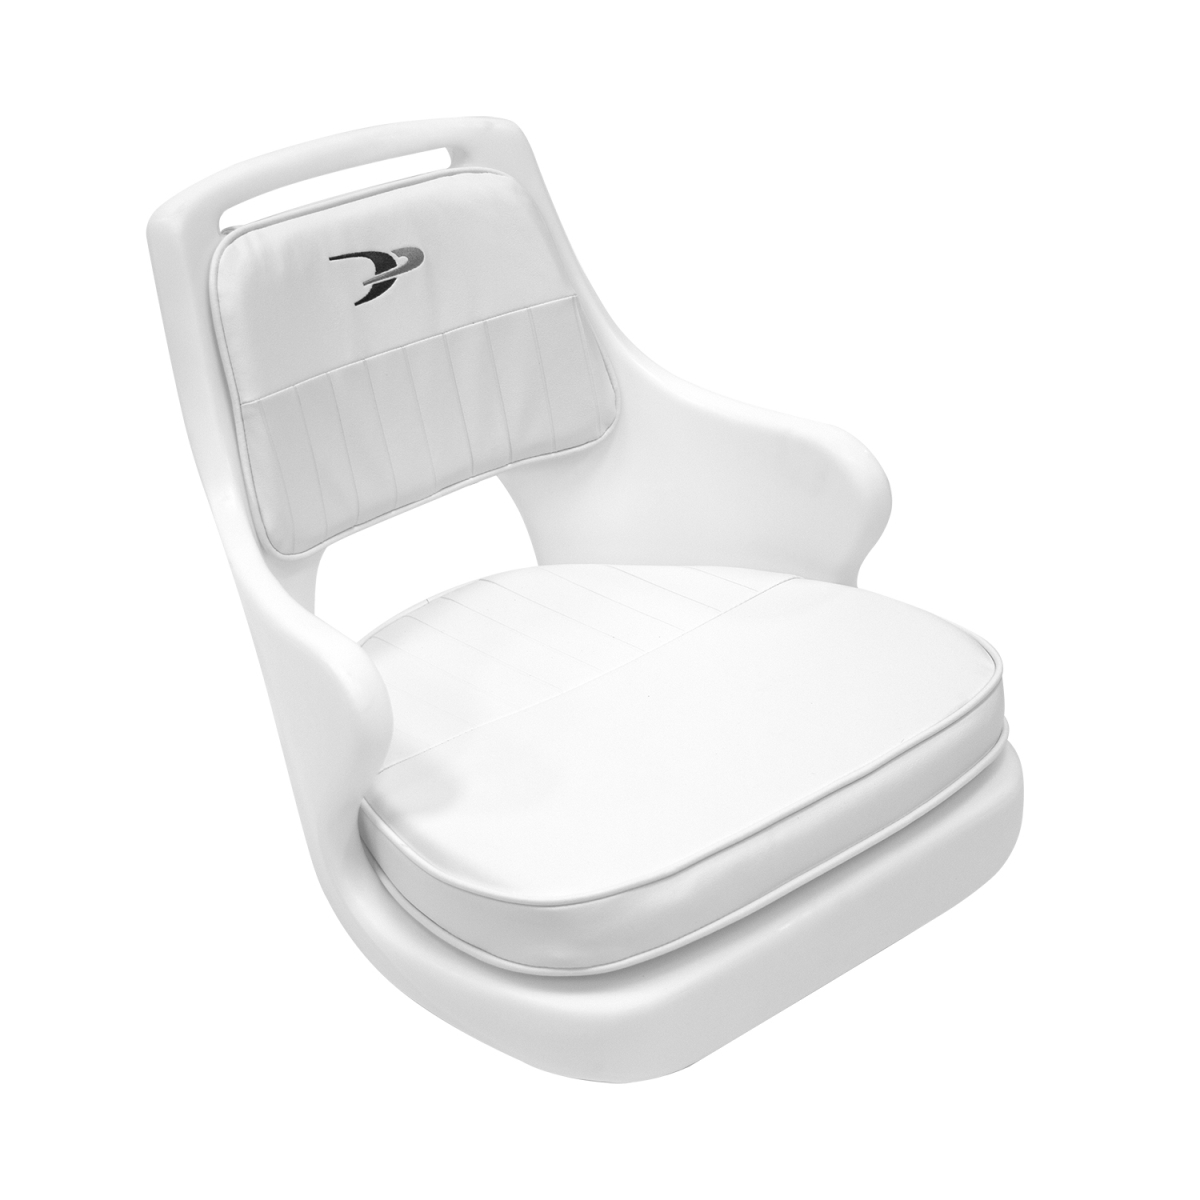 Wise 8WD015-3-710 Standard Pilot Chair with Cushions, White